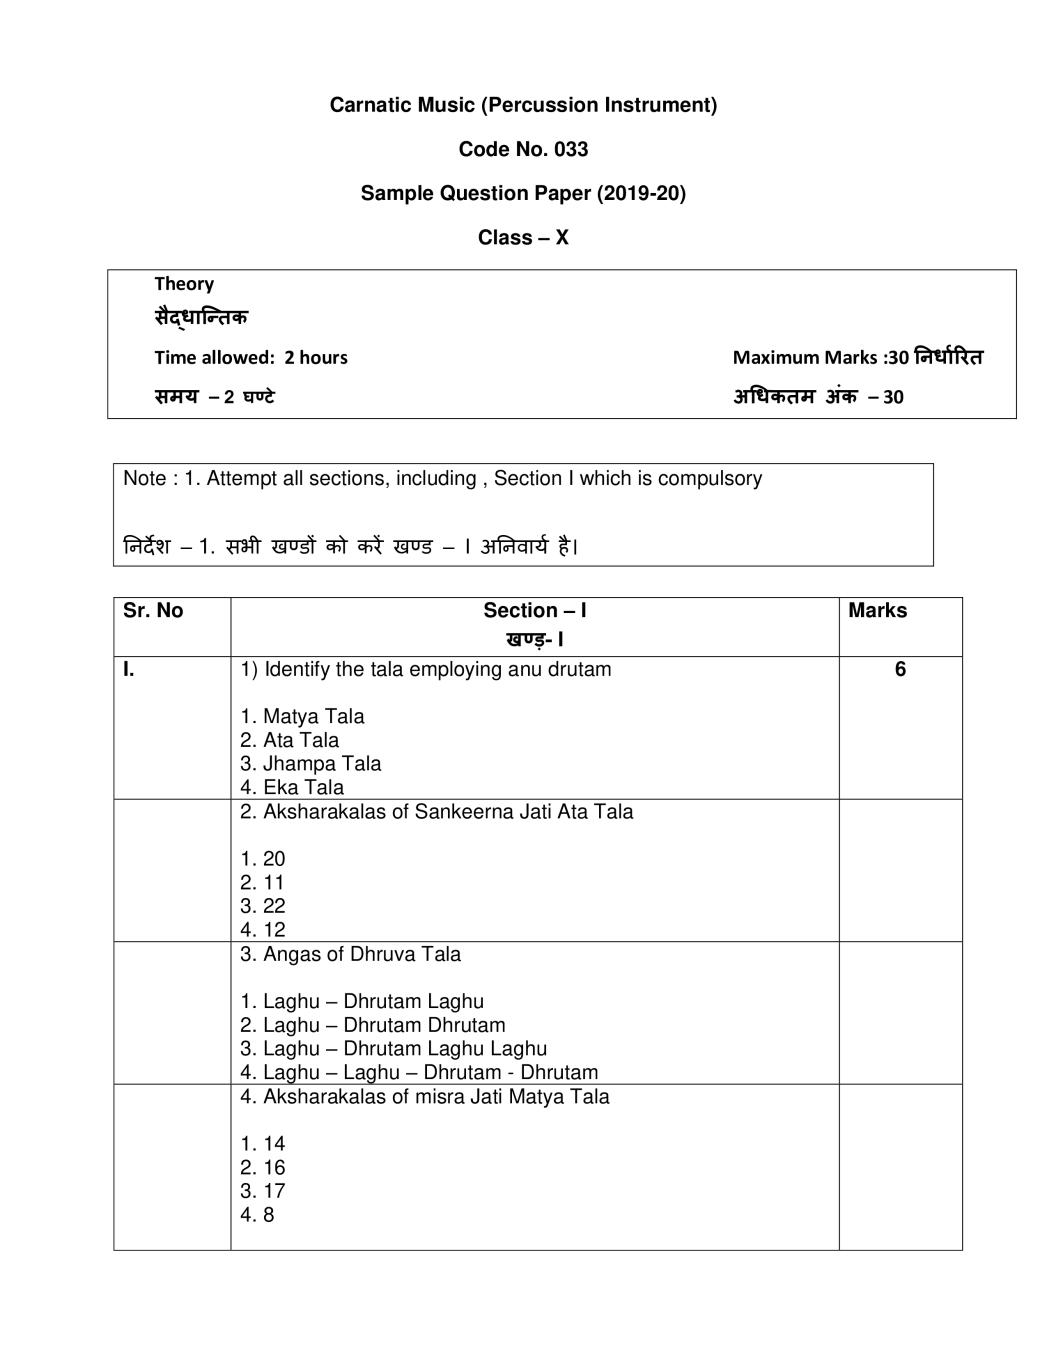 CBSE Class 10 Sample Paper 2020 for Carnatic Percussion - Page 1